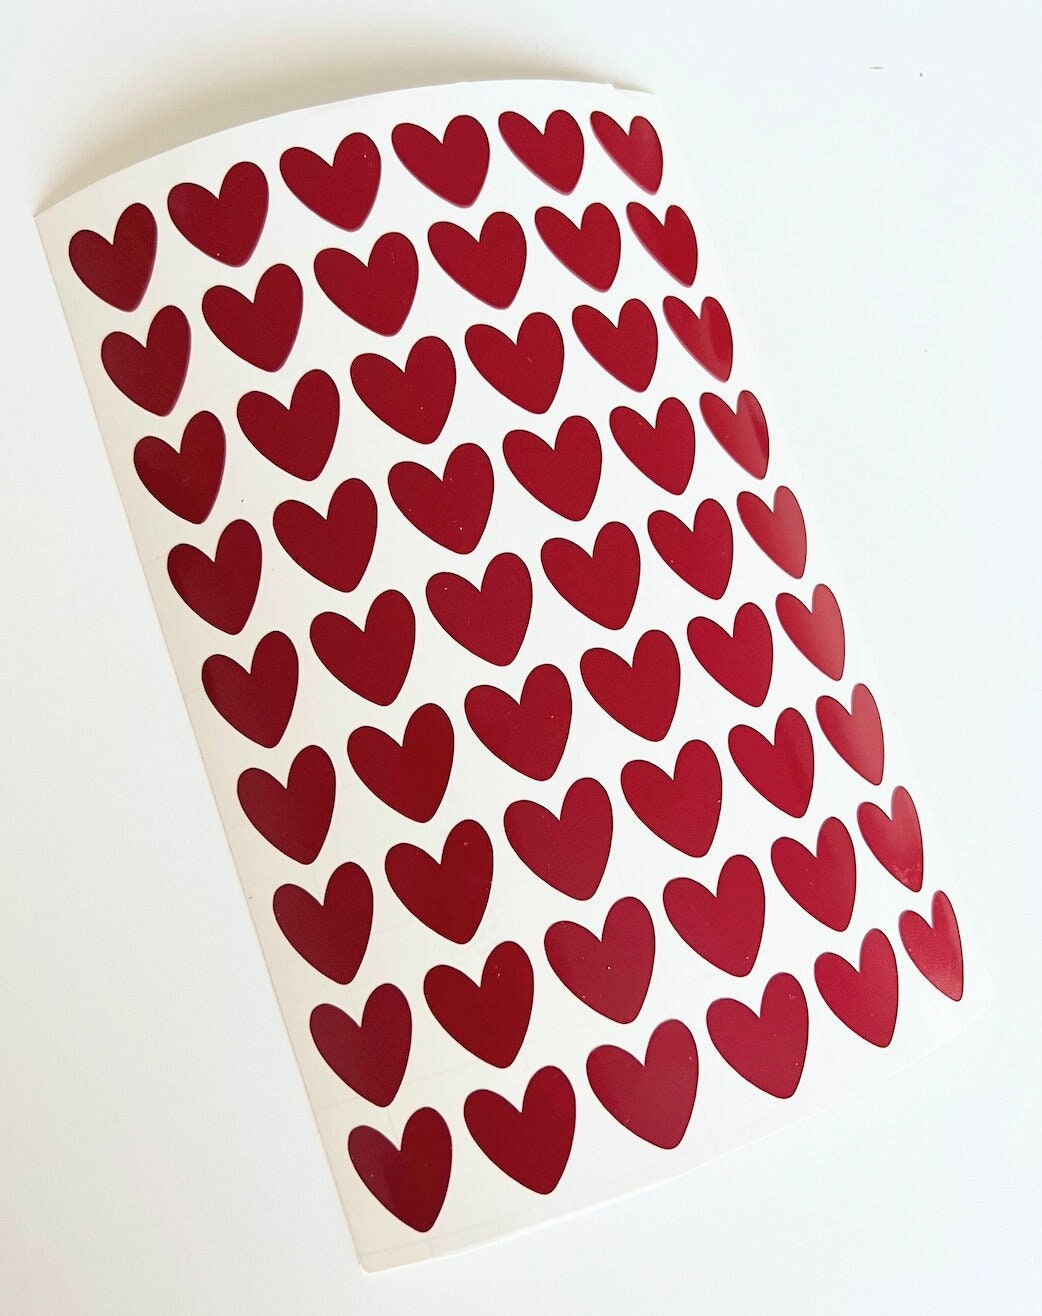  Transparent Red Heart Stickers Valentine's Day Crafting  Scrapbooking 0.75 Inch 500 Adhesive Stickers : Arts, Crafts & Sewing